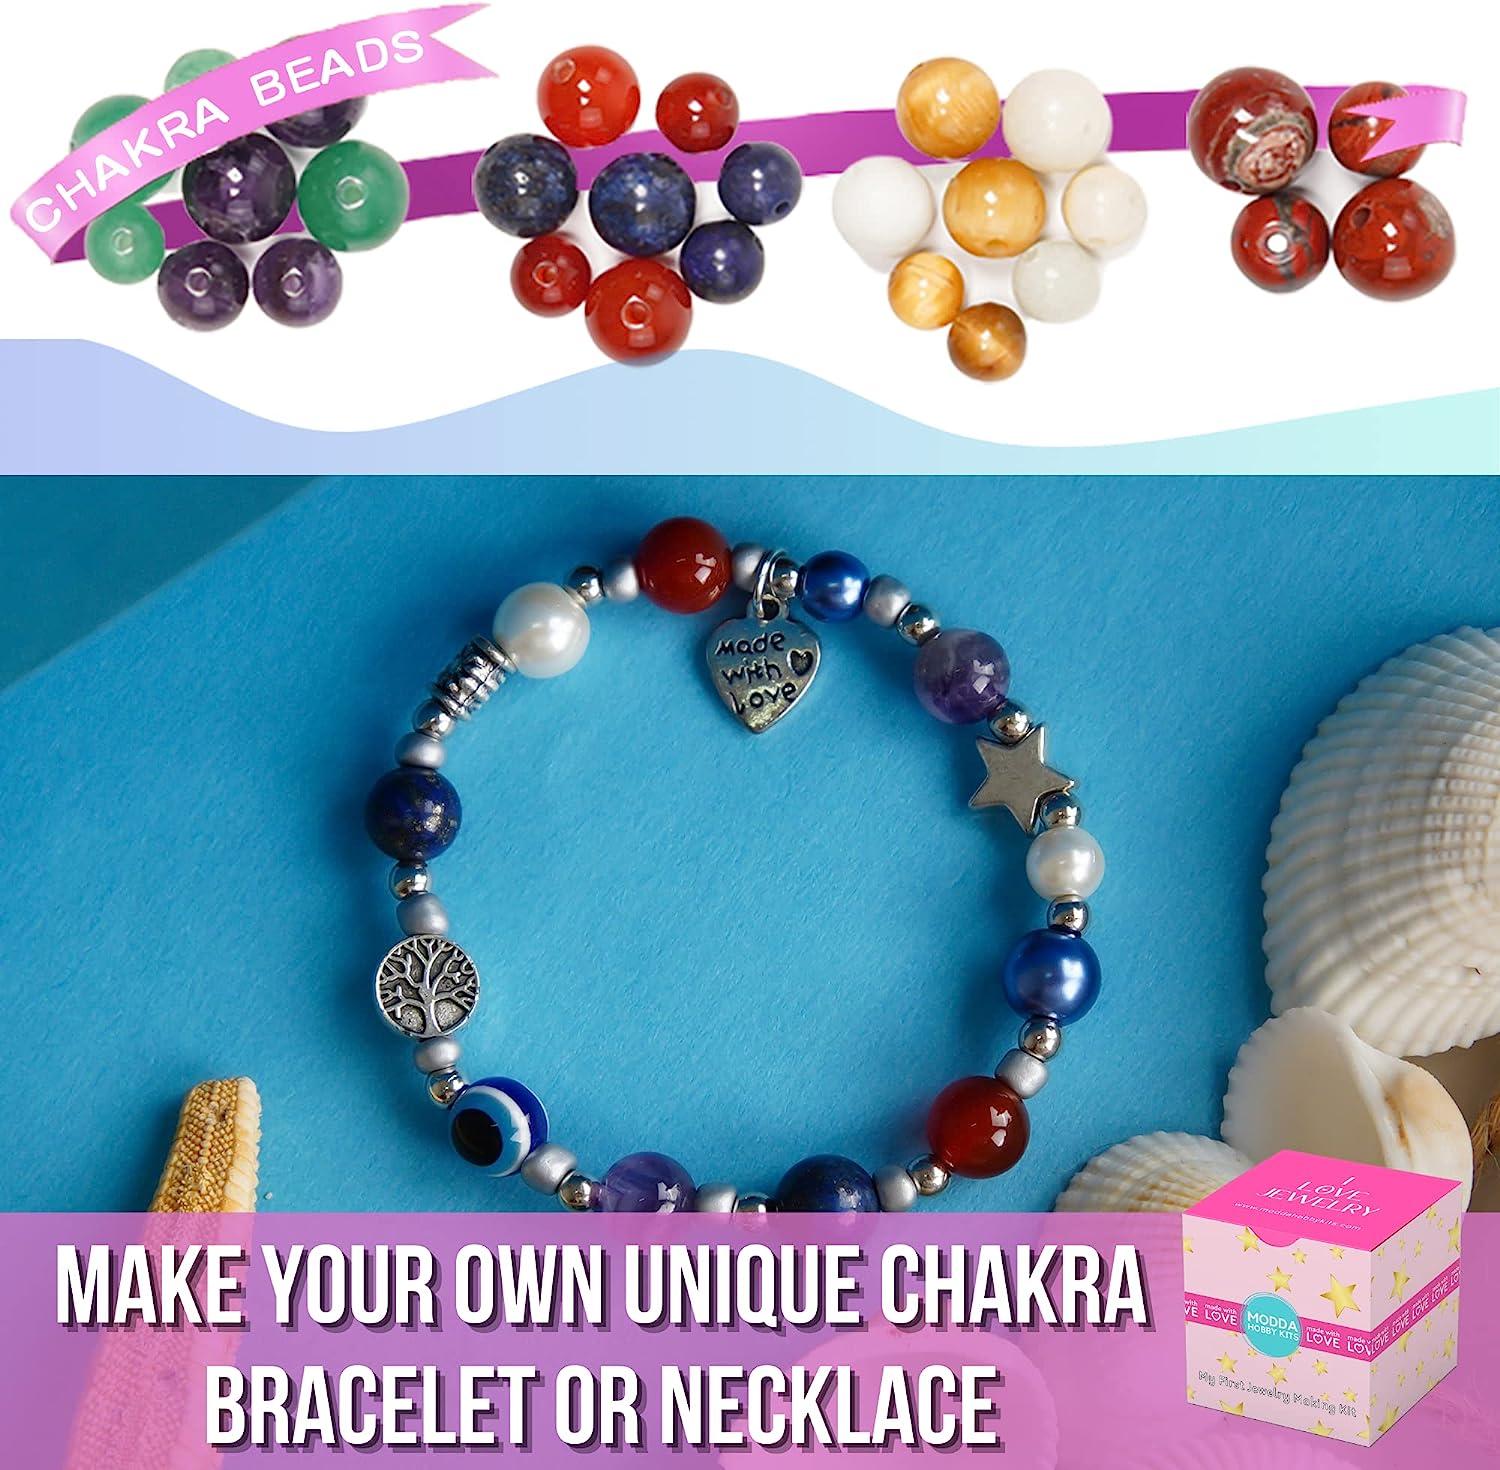 MODDA Natural Stone Jewelry Making Kit with Video Course Includes Crystal  Lava Chakra Beads Necklace Bracelet Earrings Ring Supplies Crafts for  Adults Beginners Gift for Teens Girls Women NATURAL STONES KIT w